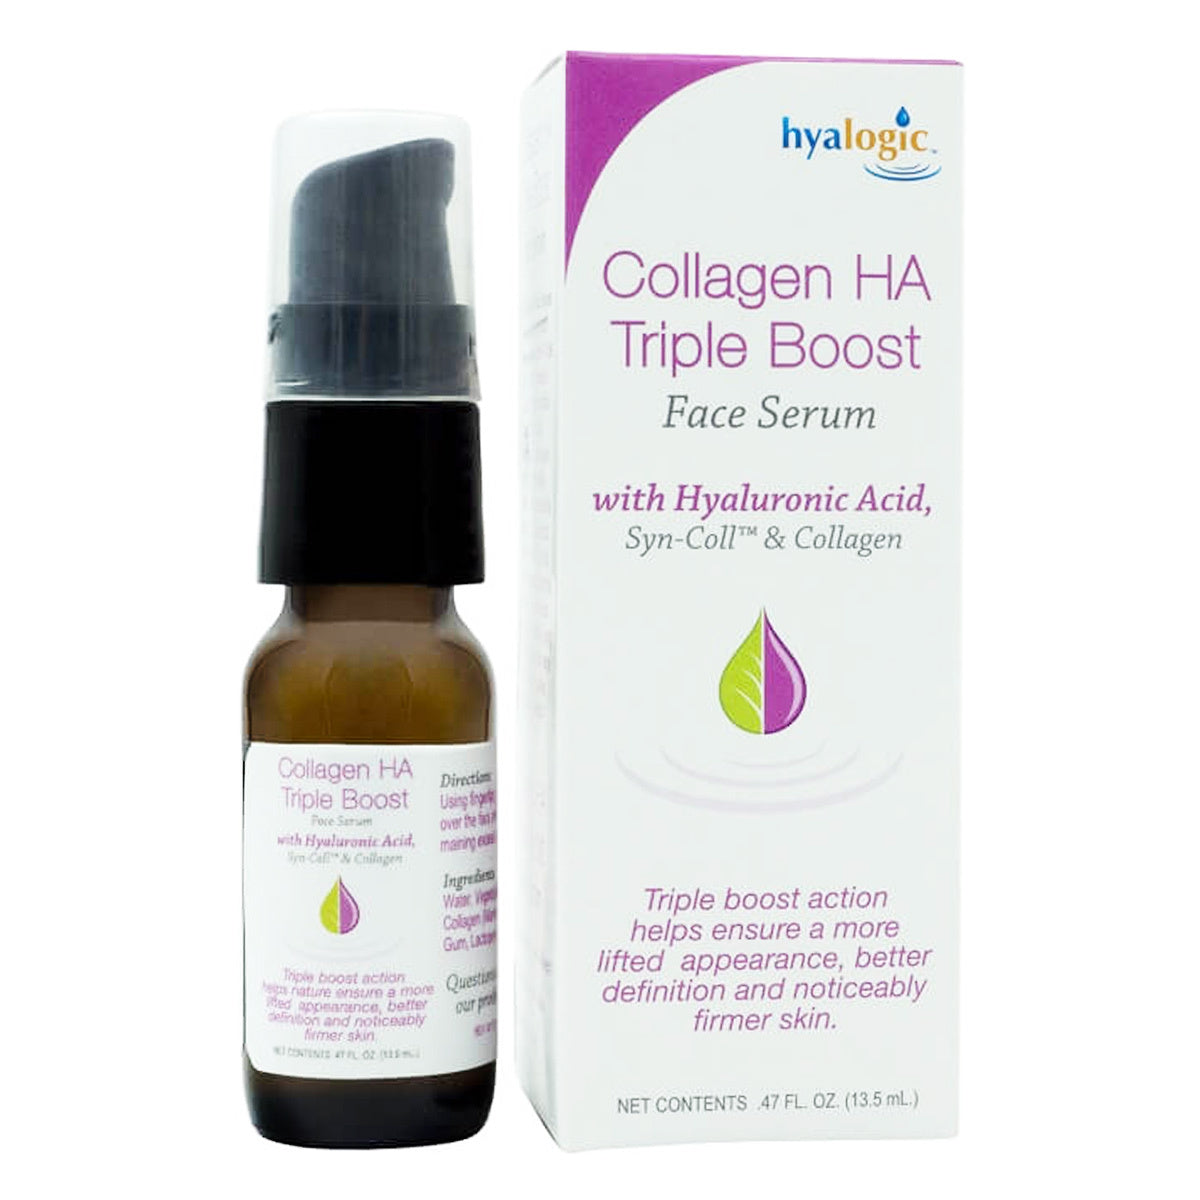 Primary image of Collagen HA Triple Boost Face Serum